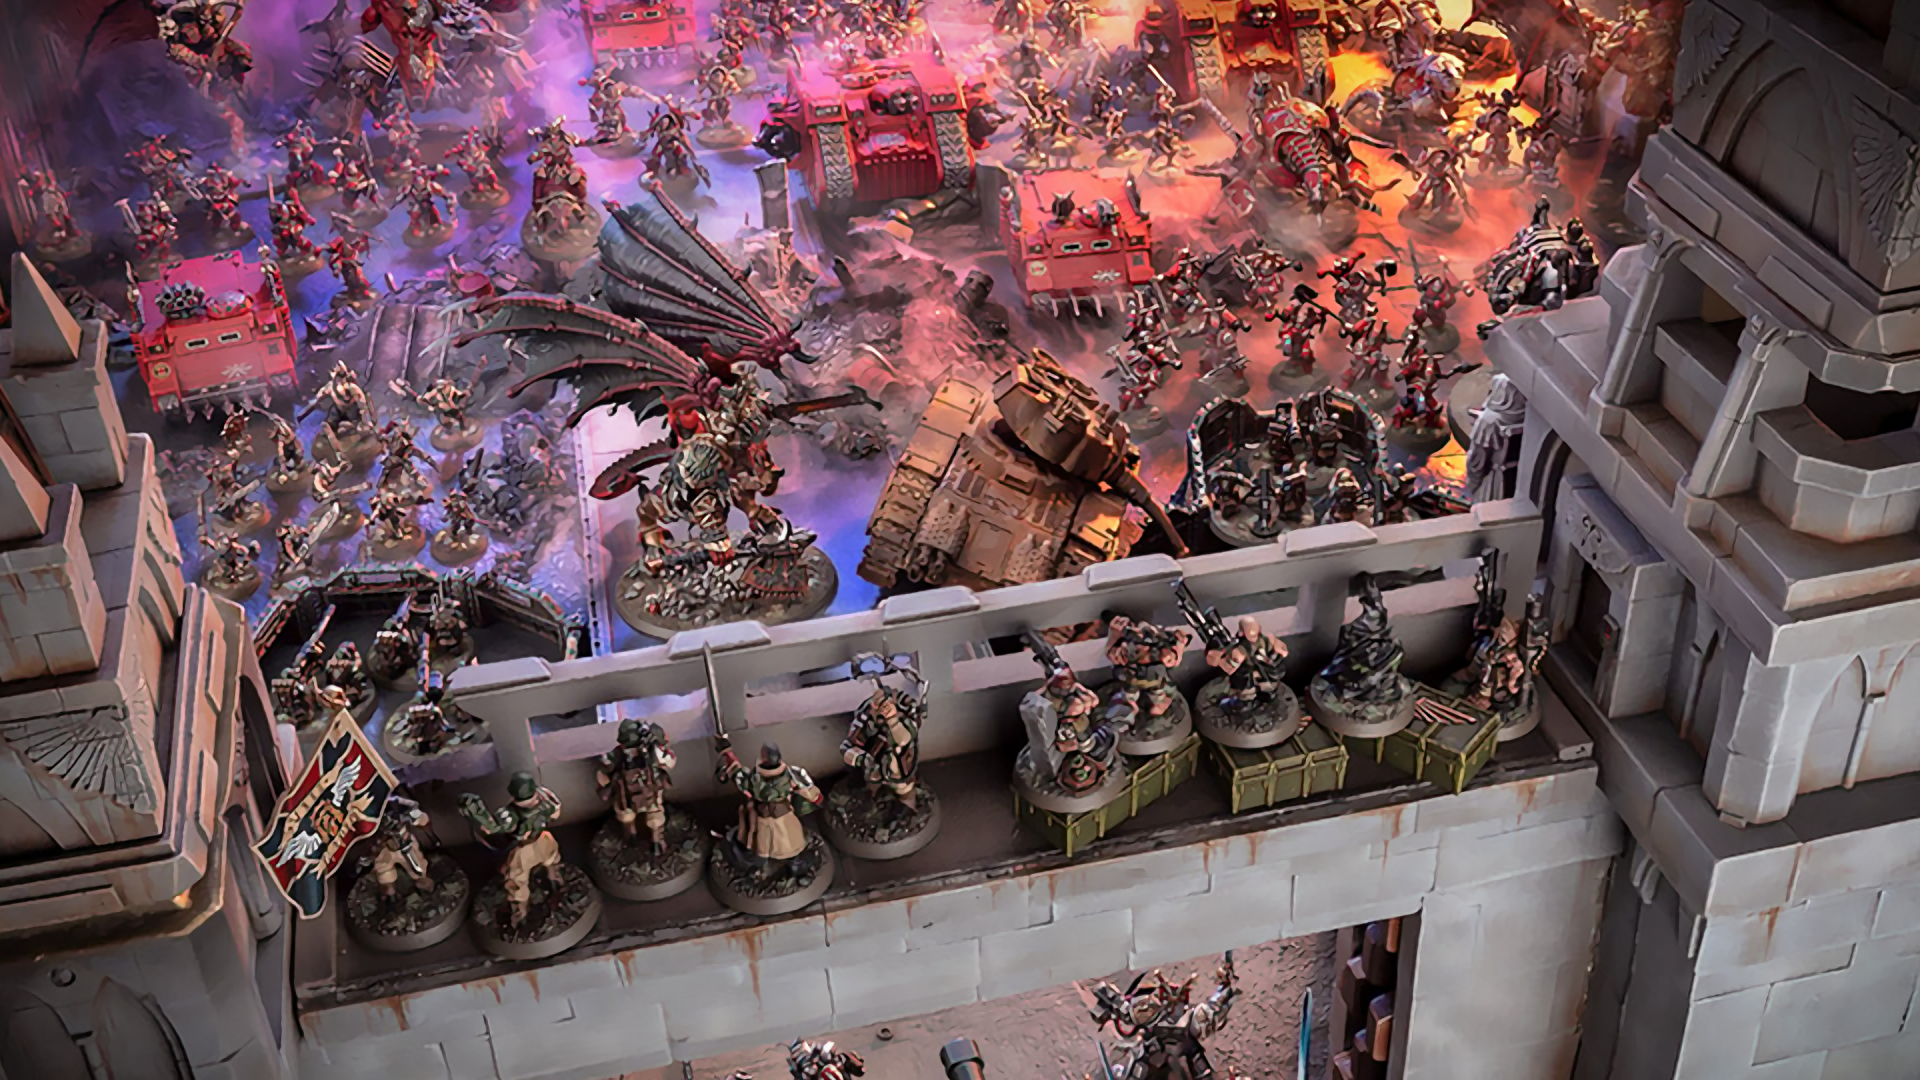 Warhammer 40,000: The World Eaters army assembles, led by the figure of Angron, a terrifying demon primarch.